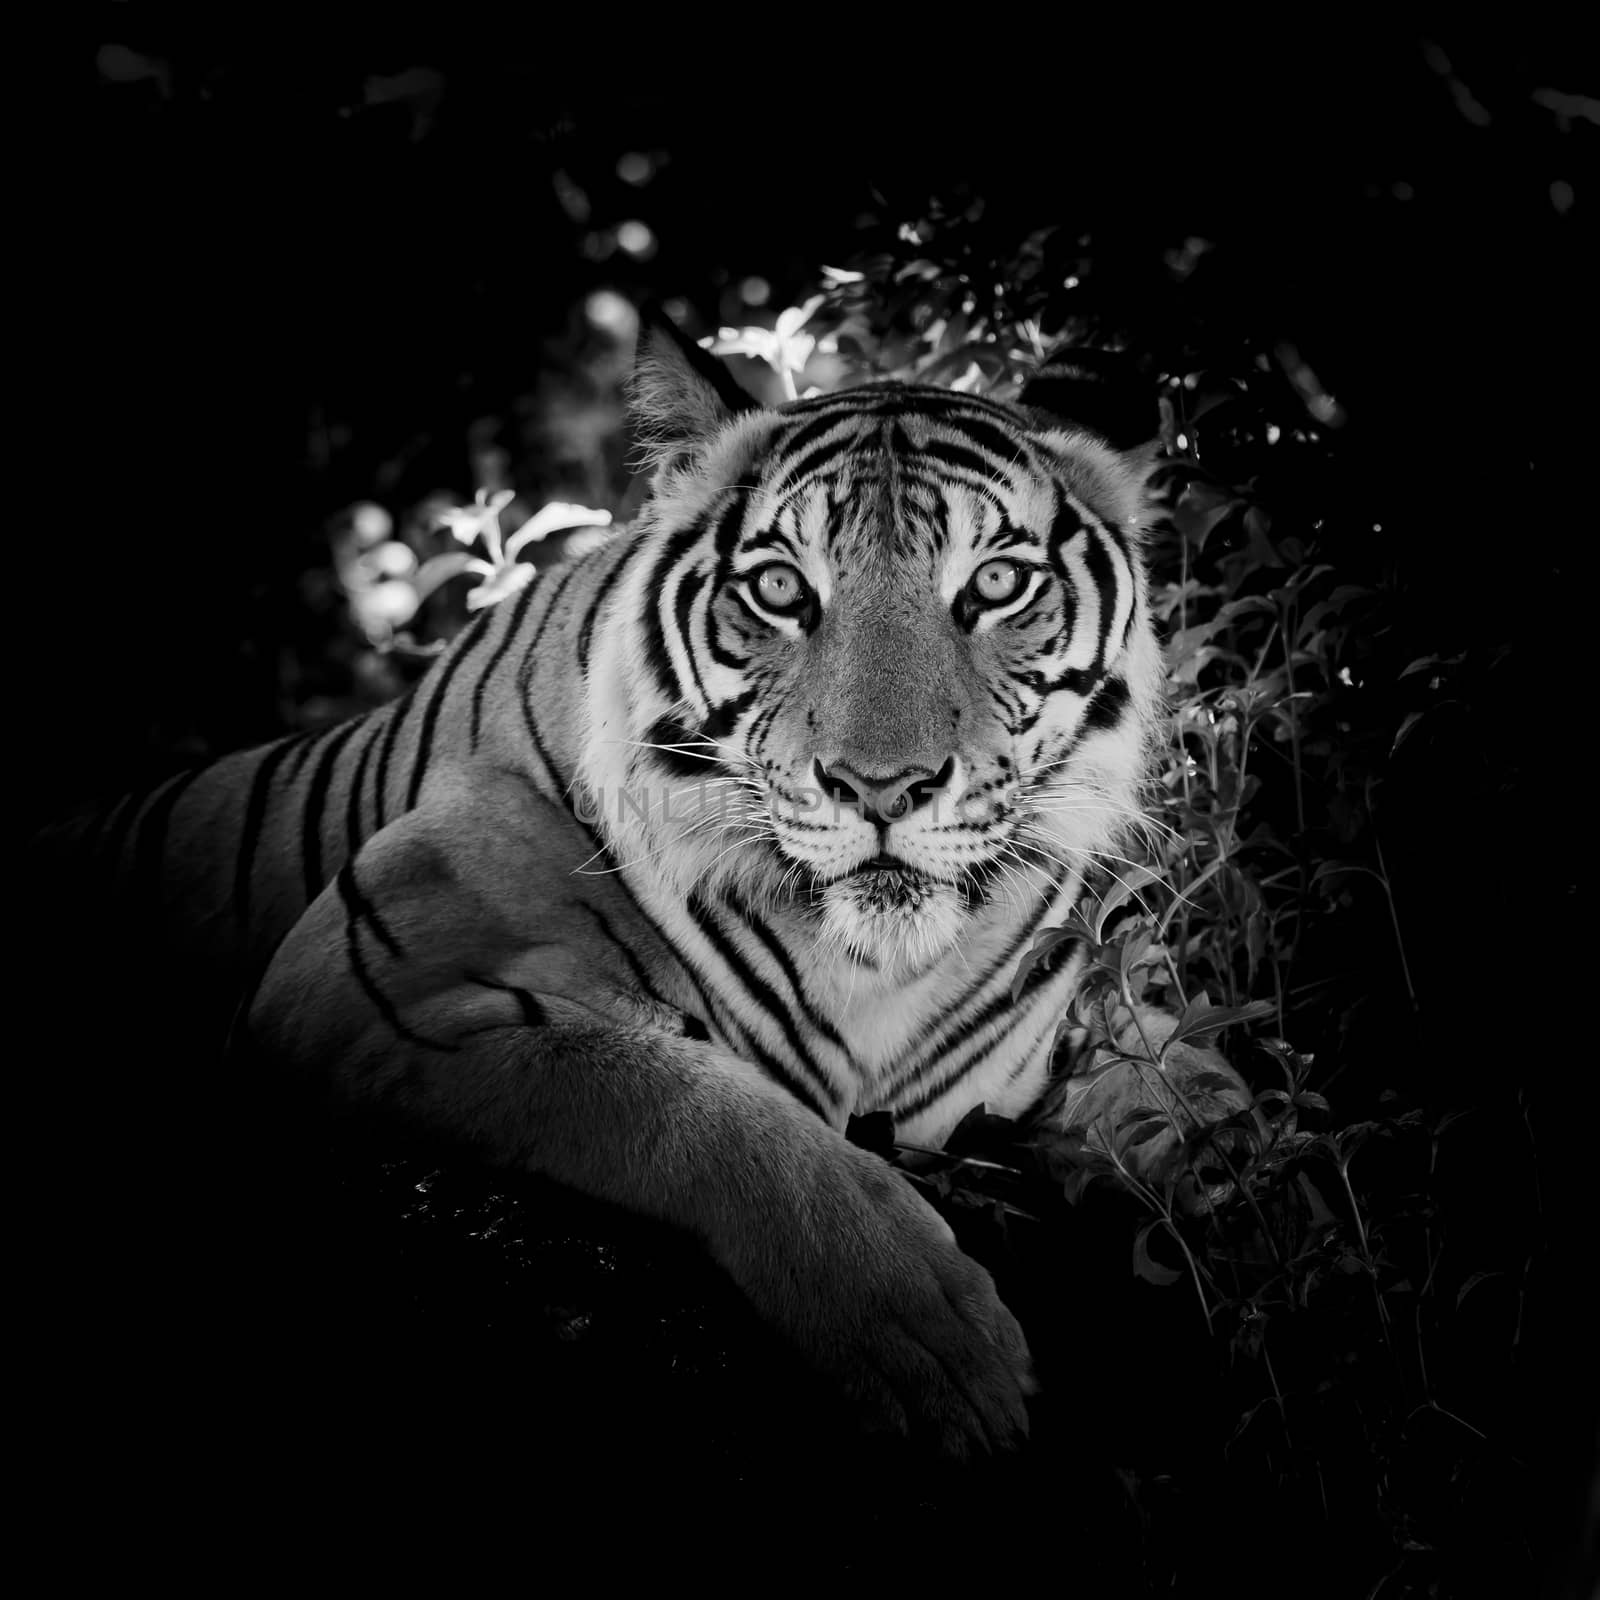 Black & White Beautiful tiger - isolated on black background by art9858